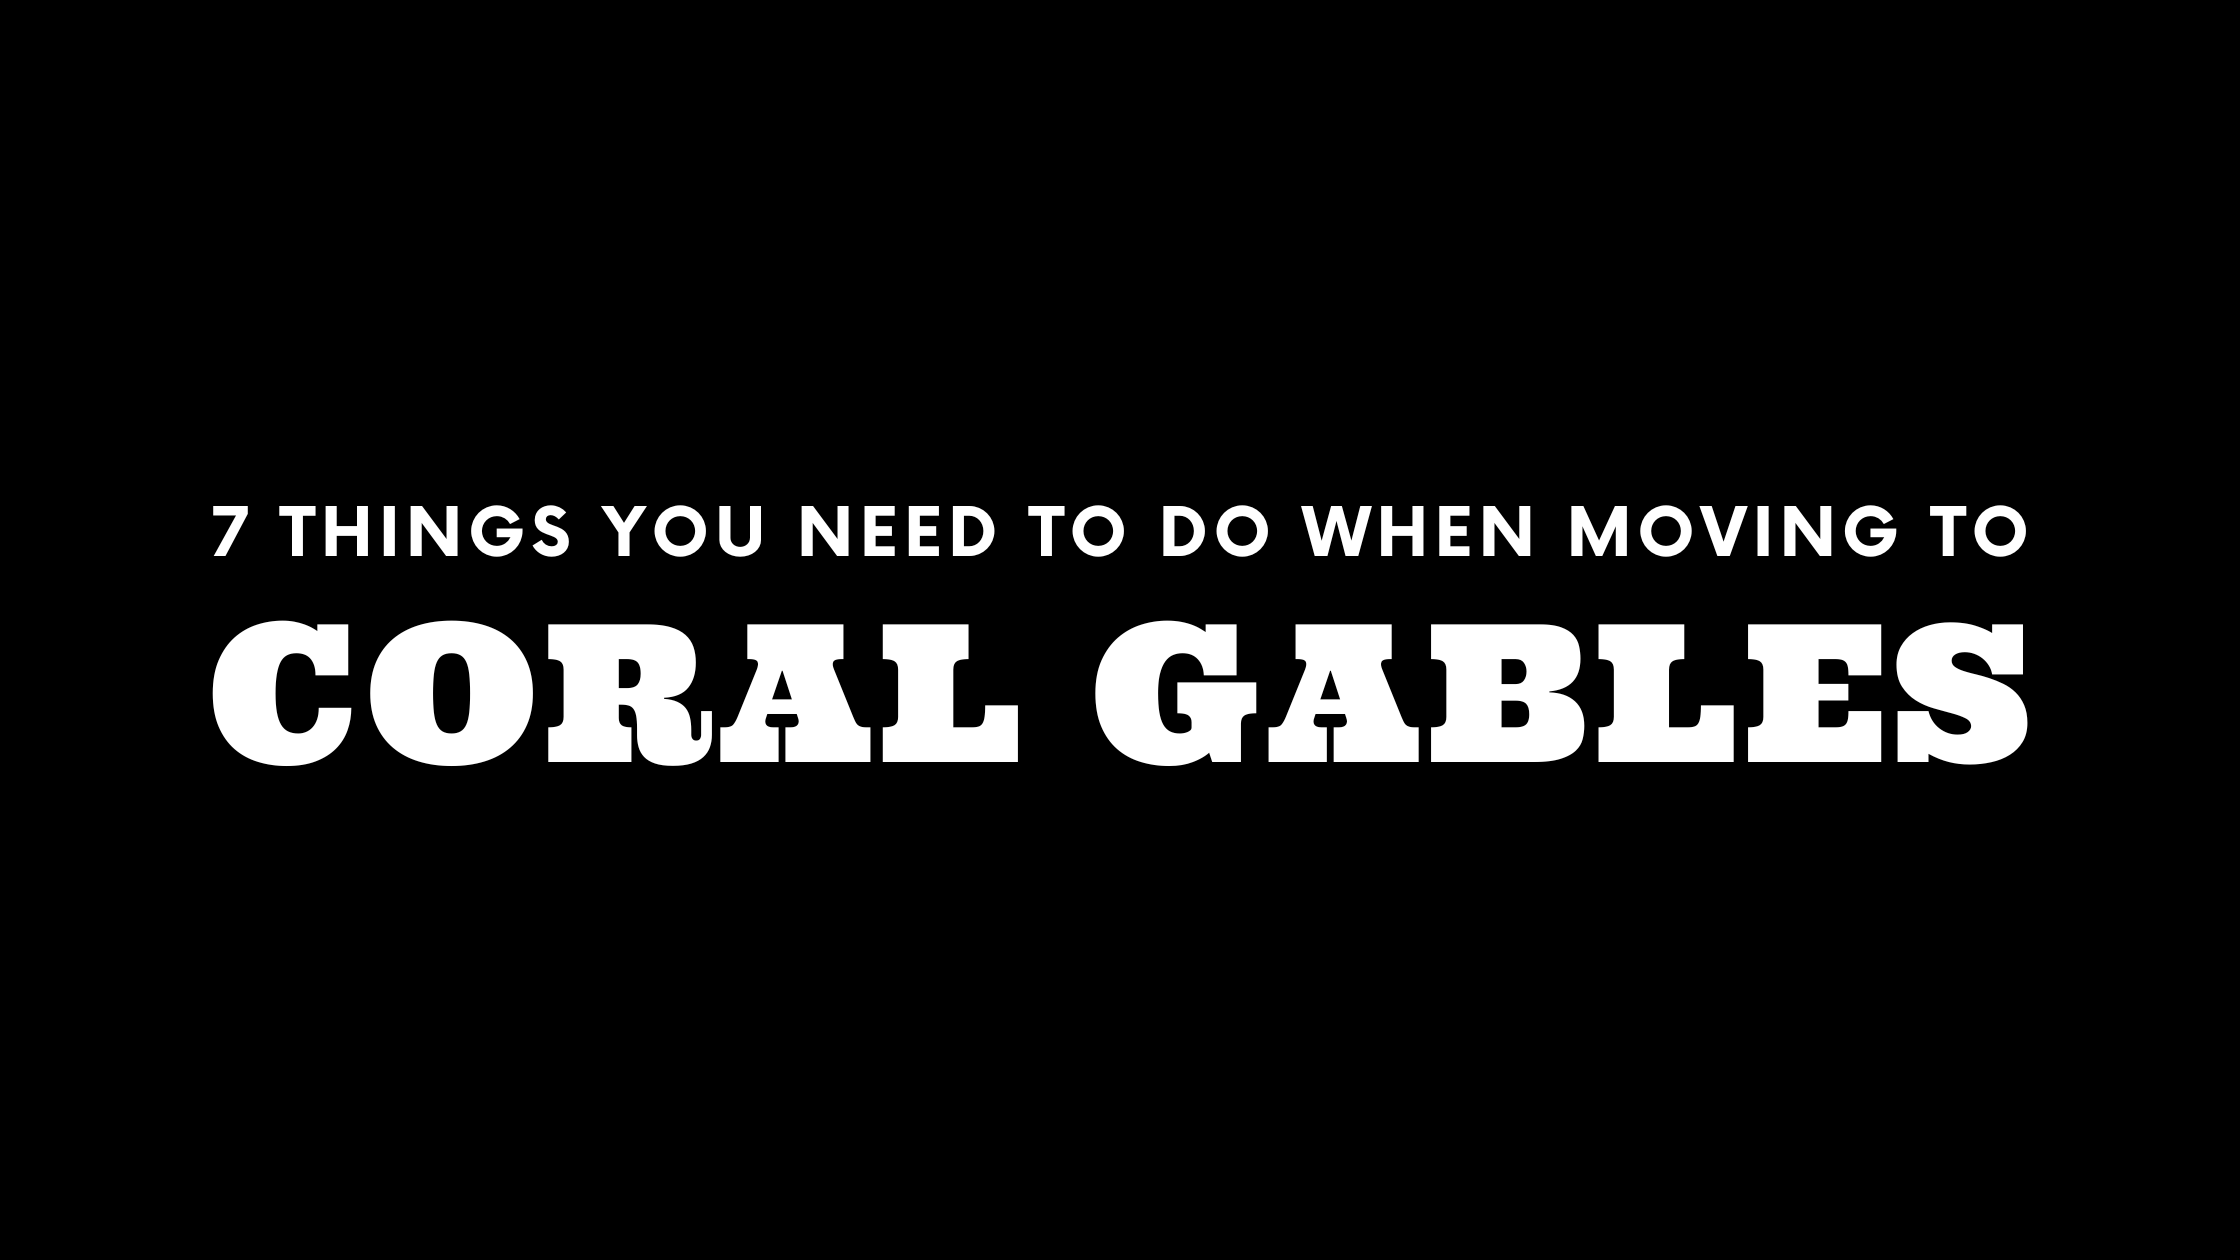 Moving to Coral Gables? 7 Things You Need To Do Immediately!